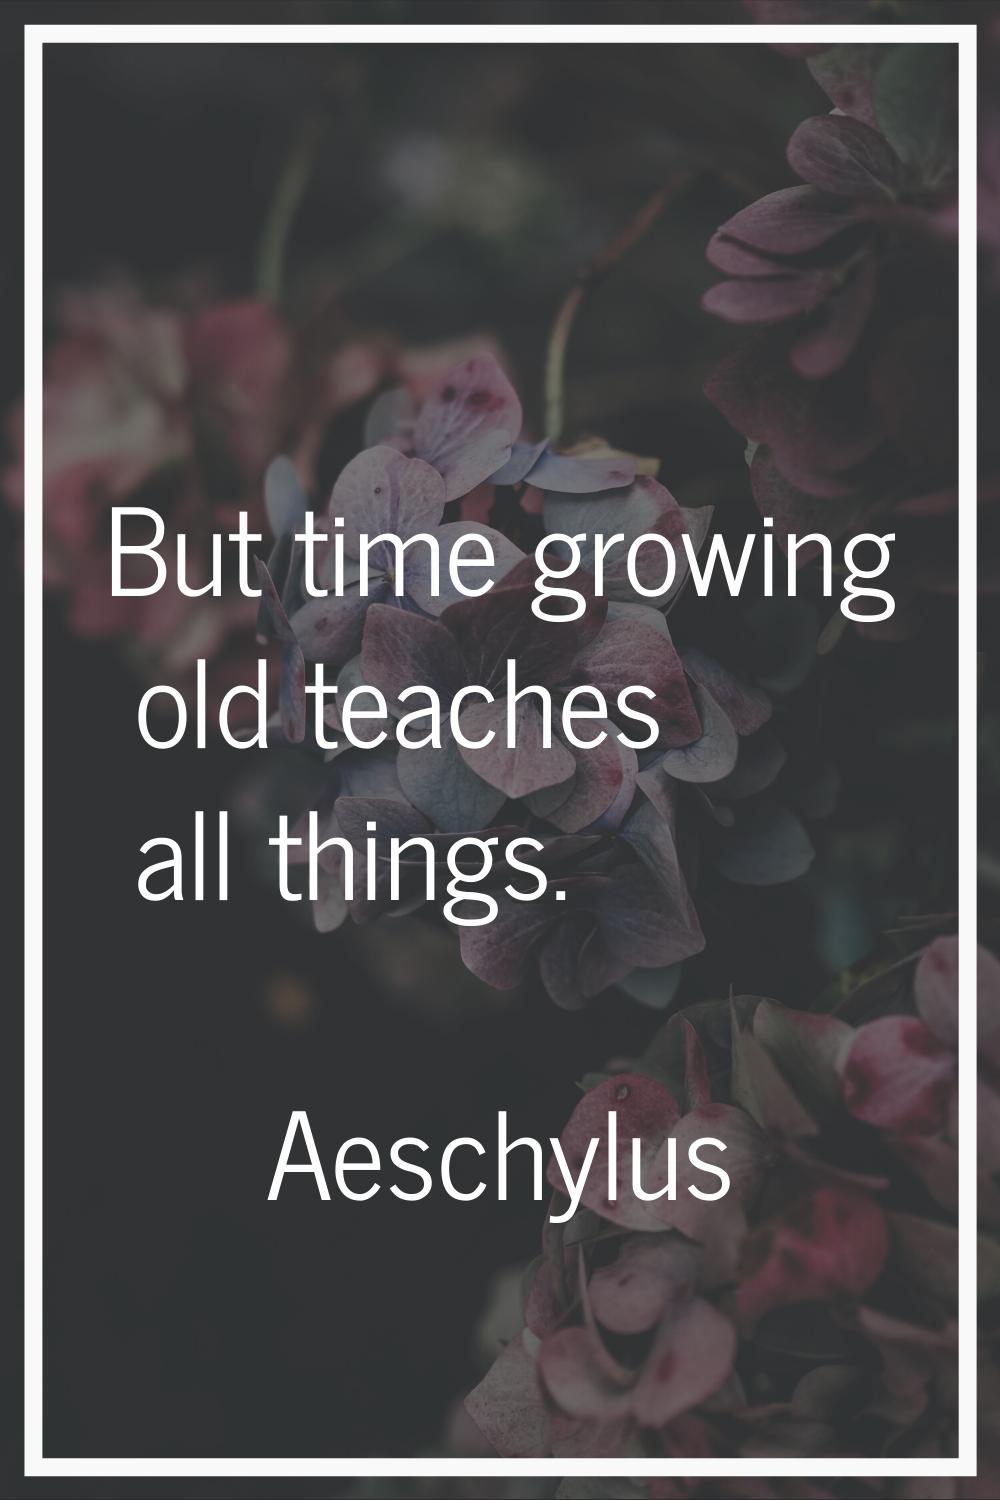 But time growing old teaches all things.